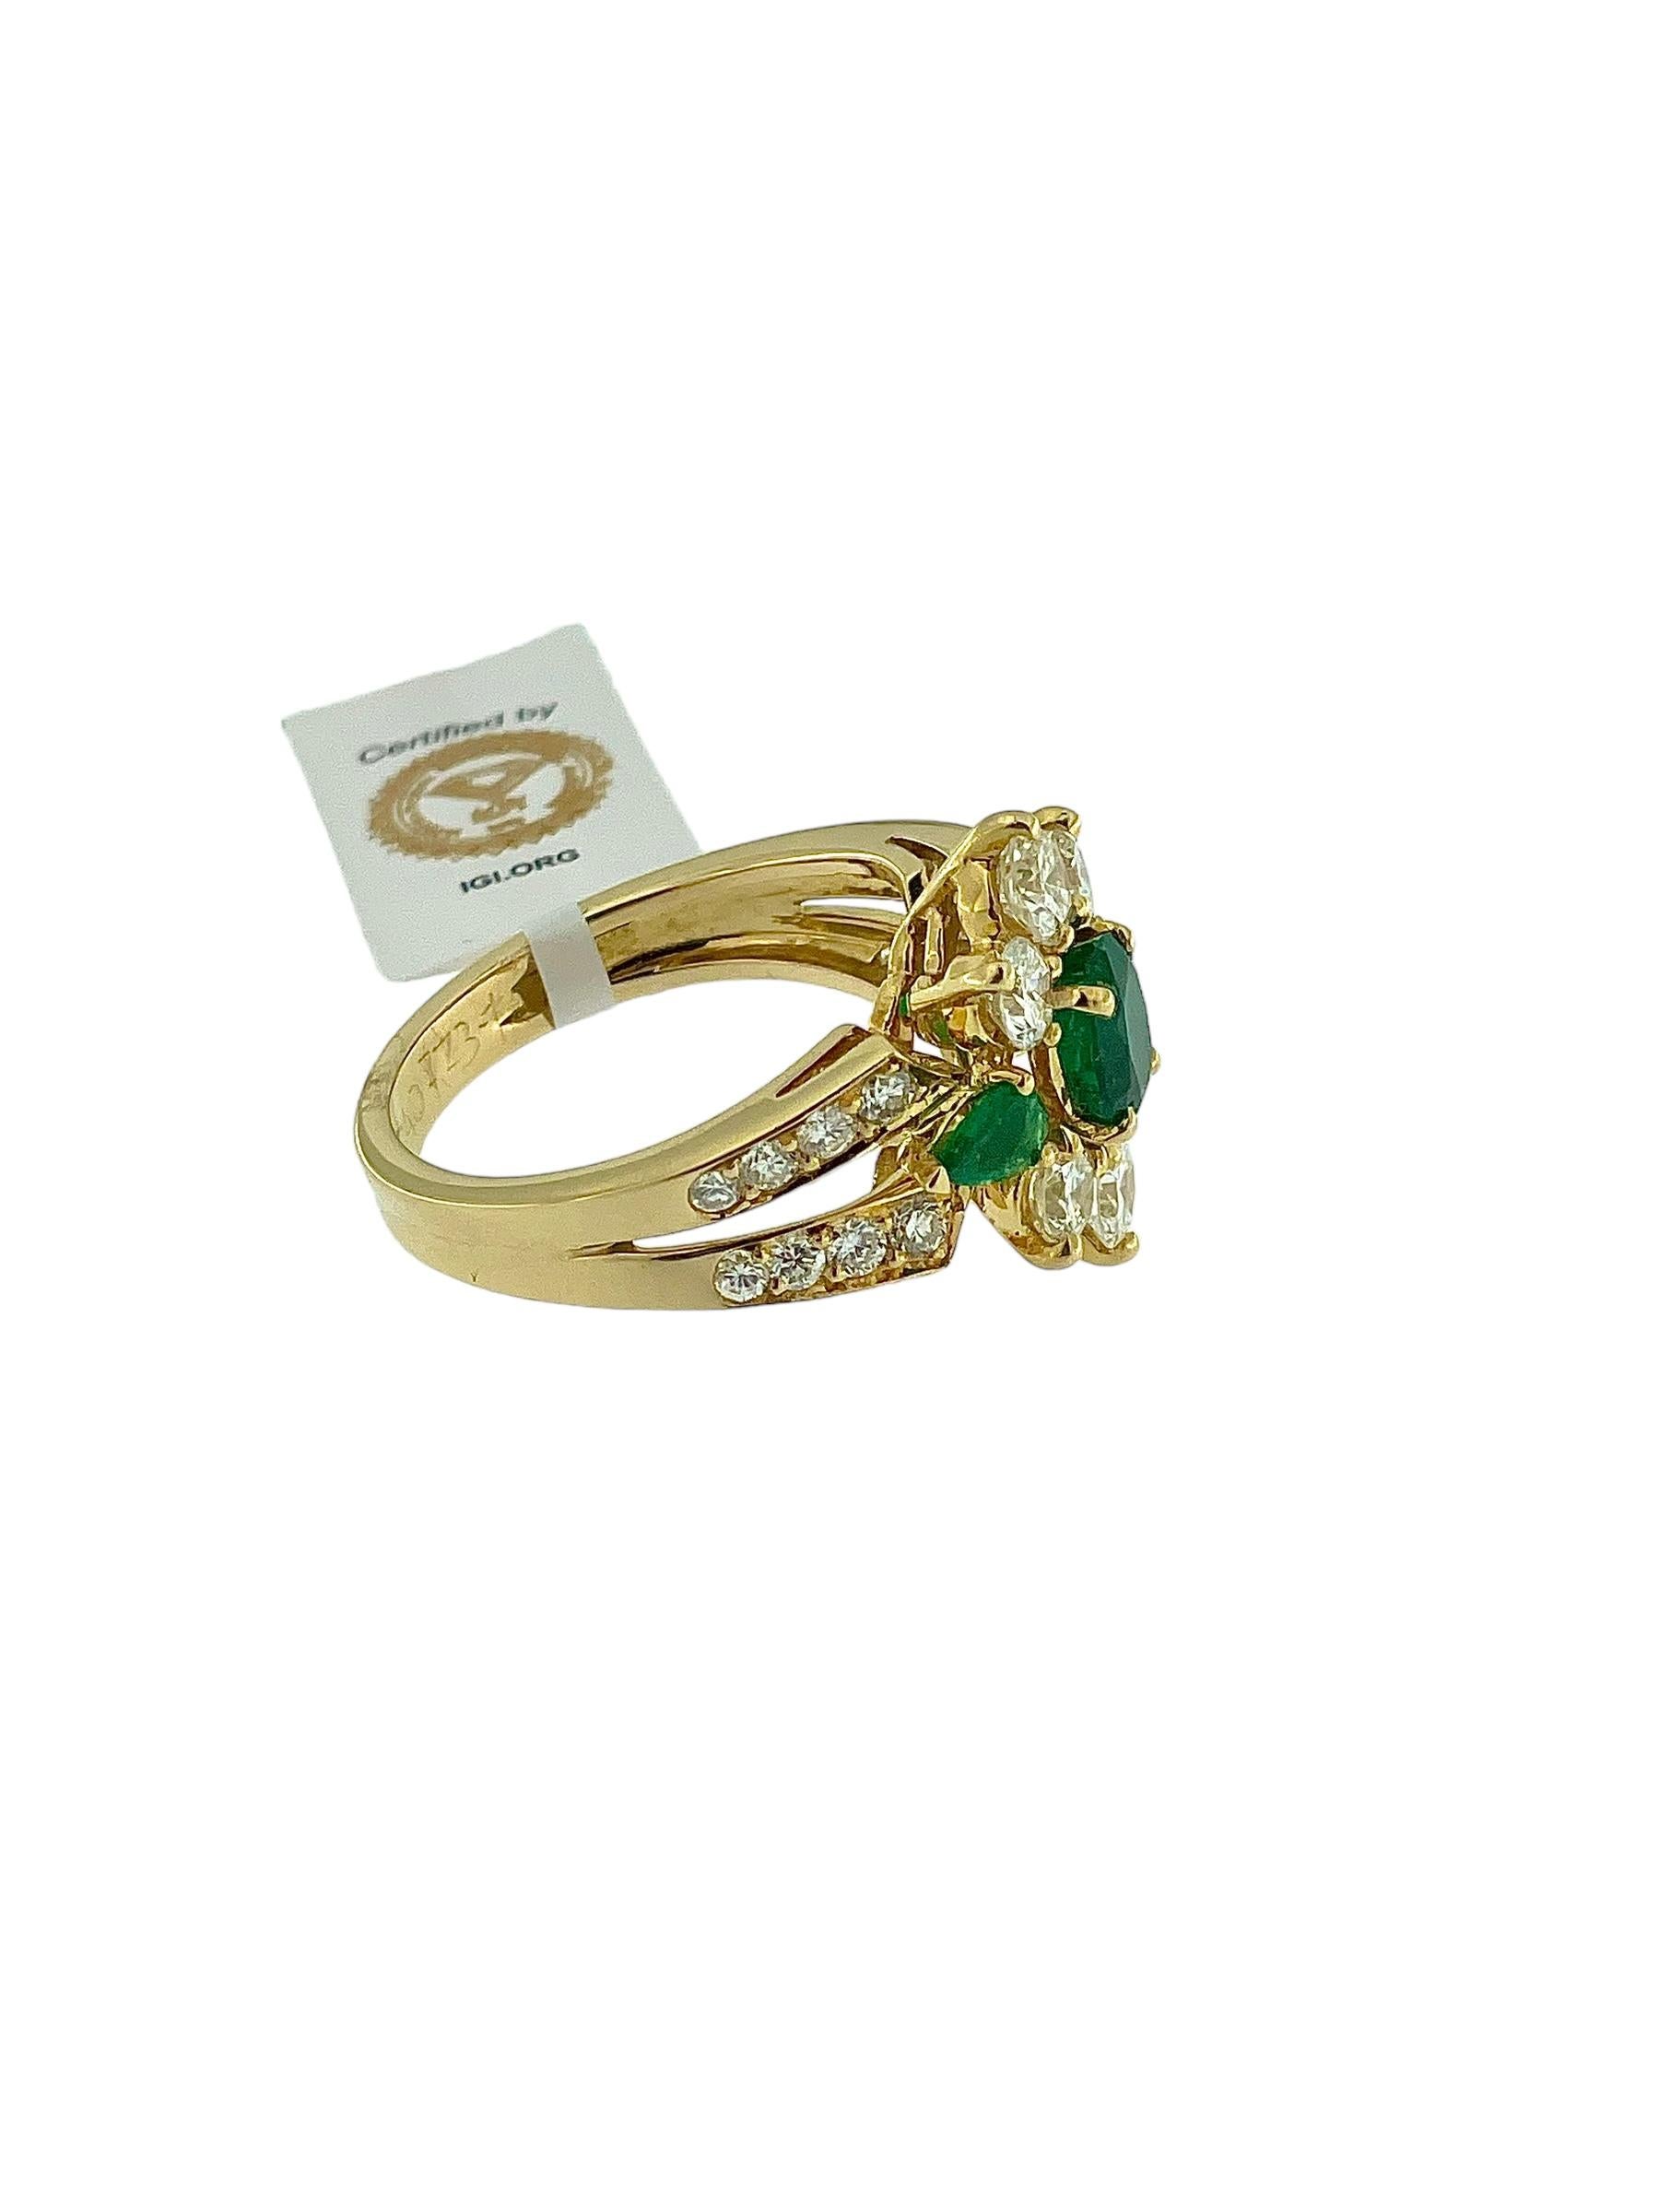 Retro Yellow Gold French Cocktail Ring with Emeralds and Diamonds IGI Certified In Good Condition For Sale In Esch-Sur-Alzette, LU